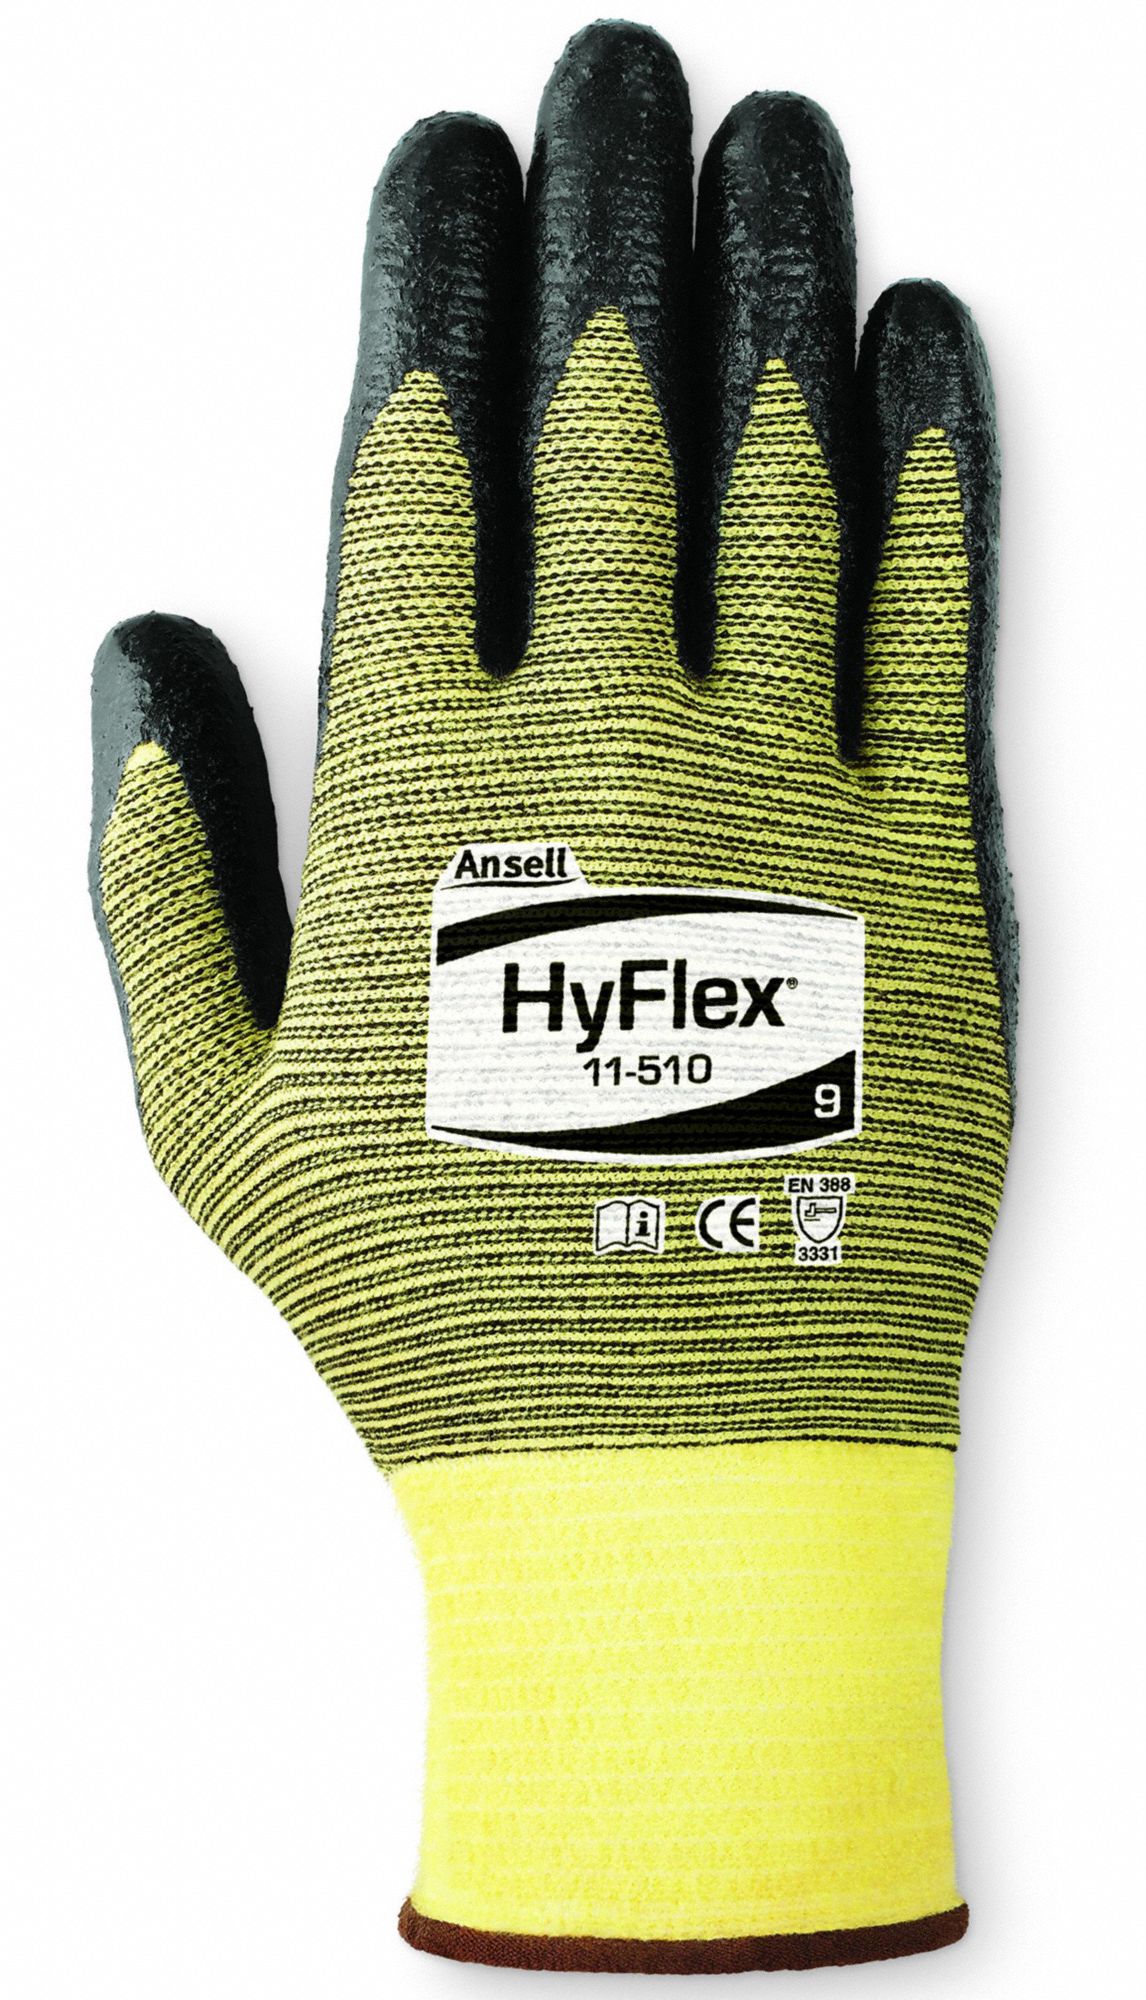 3 Pair Ansell HyFlex 11-510  Cut Resistant Gloves Size 9 